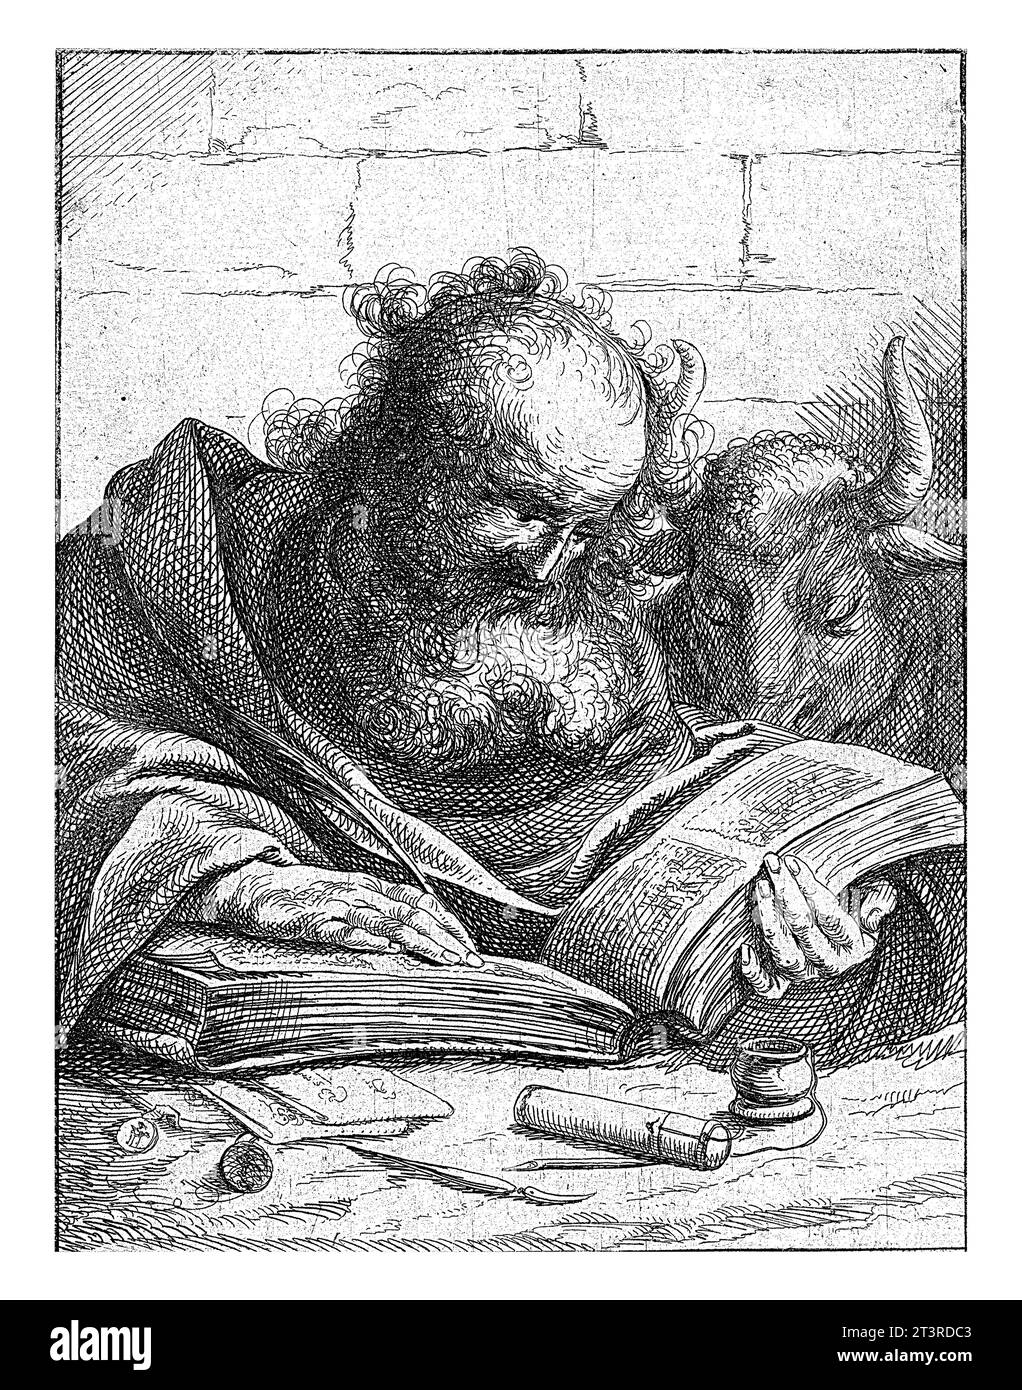 The Evangelist Lucas, Laurent de La Hire (attributed to), after Jan Lievens, 1625 - 1674 The Evangelist Luke with his attribute the ox Stock Photo